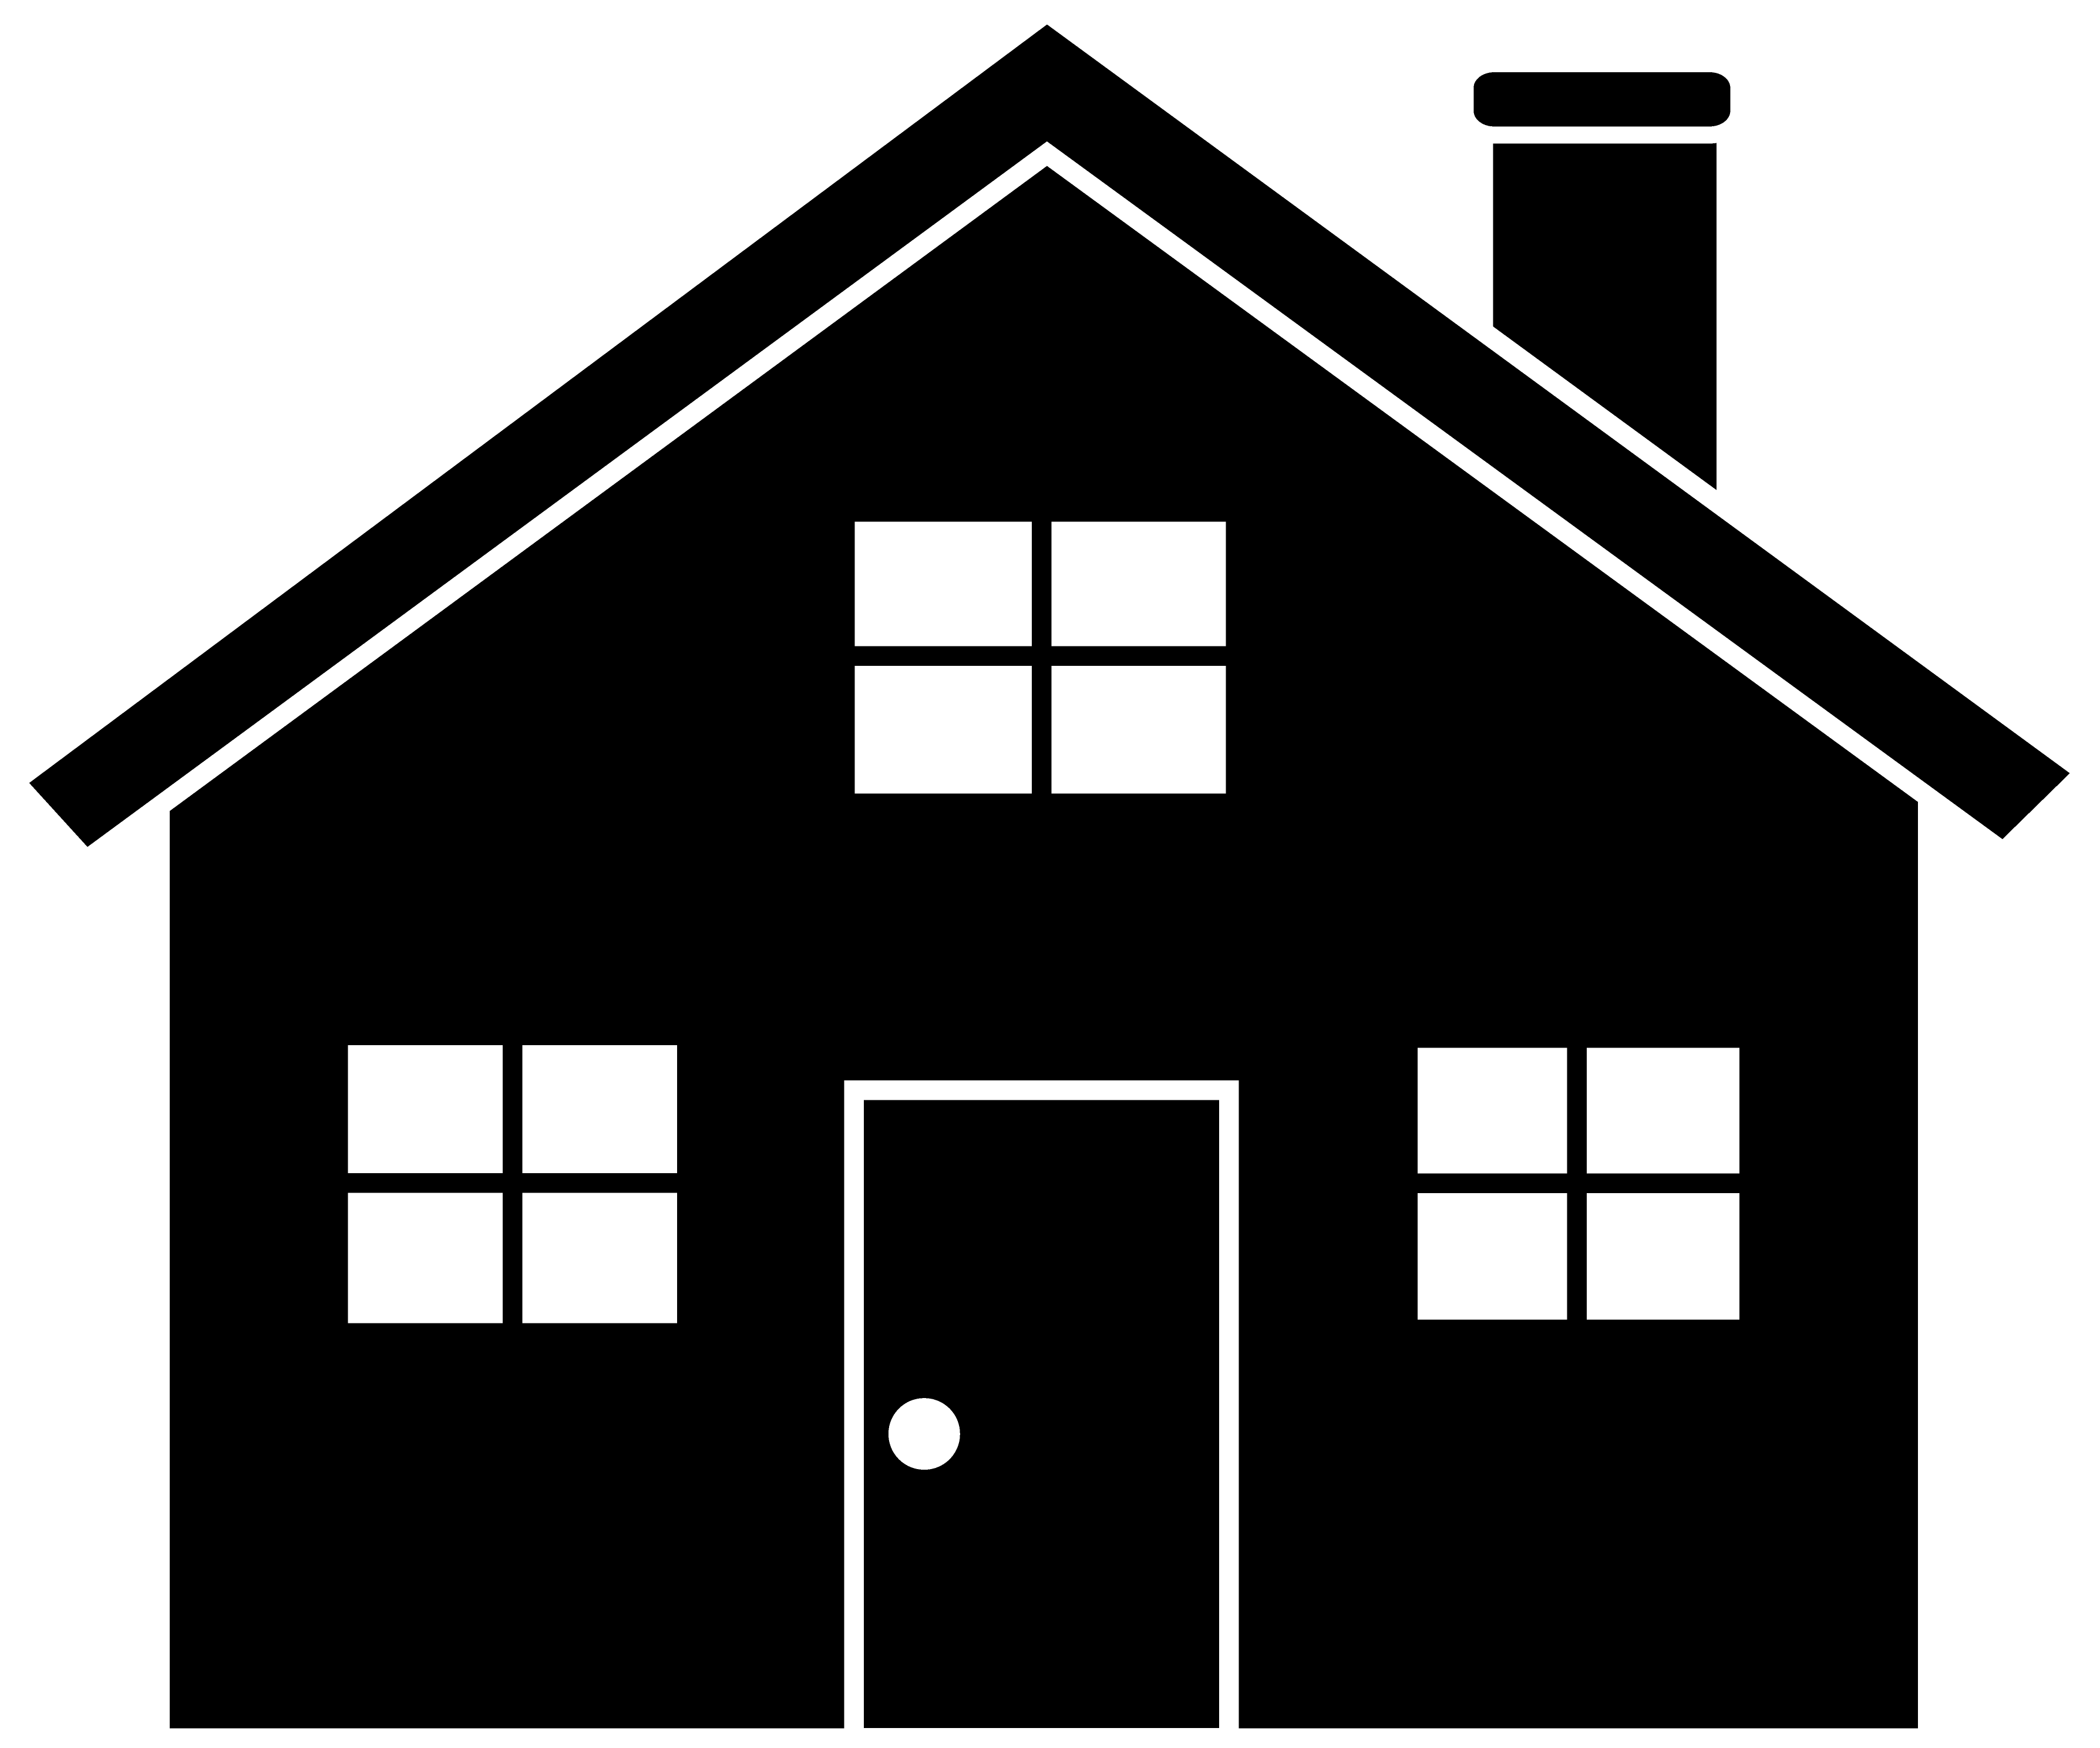  - Clipart Of House